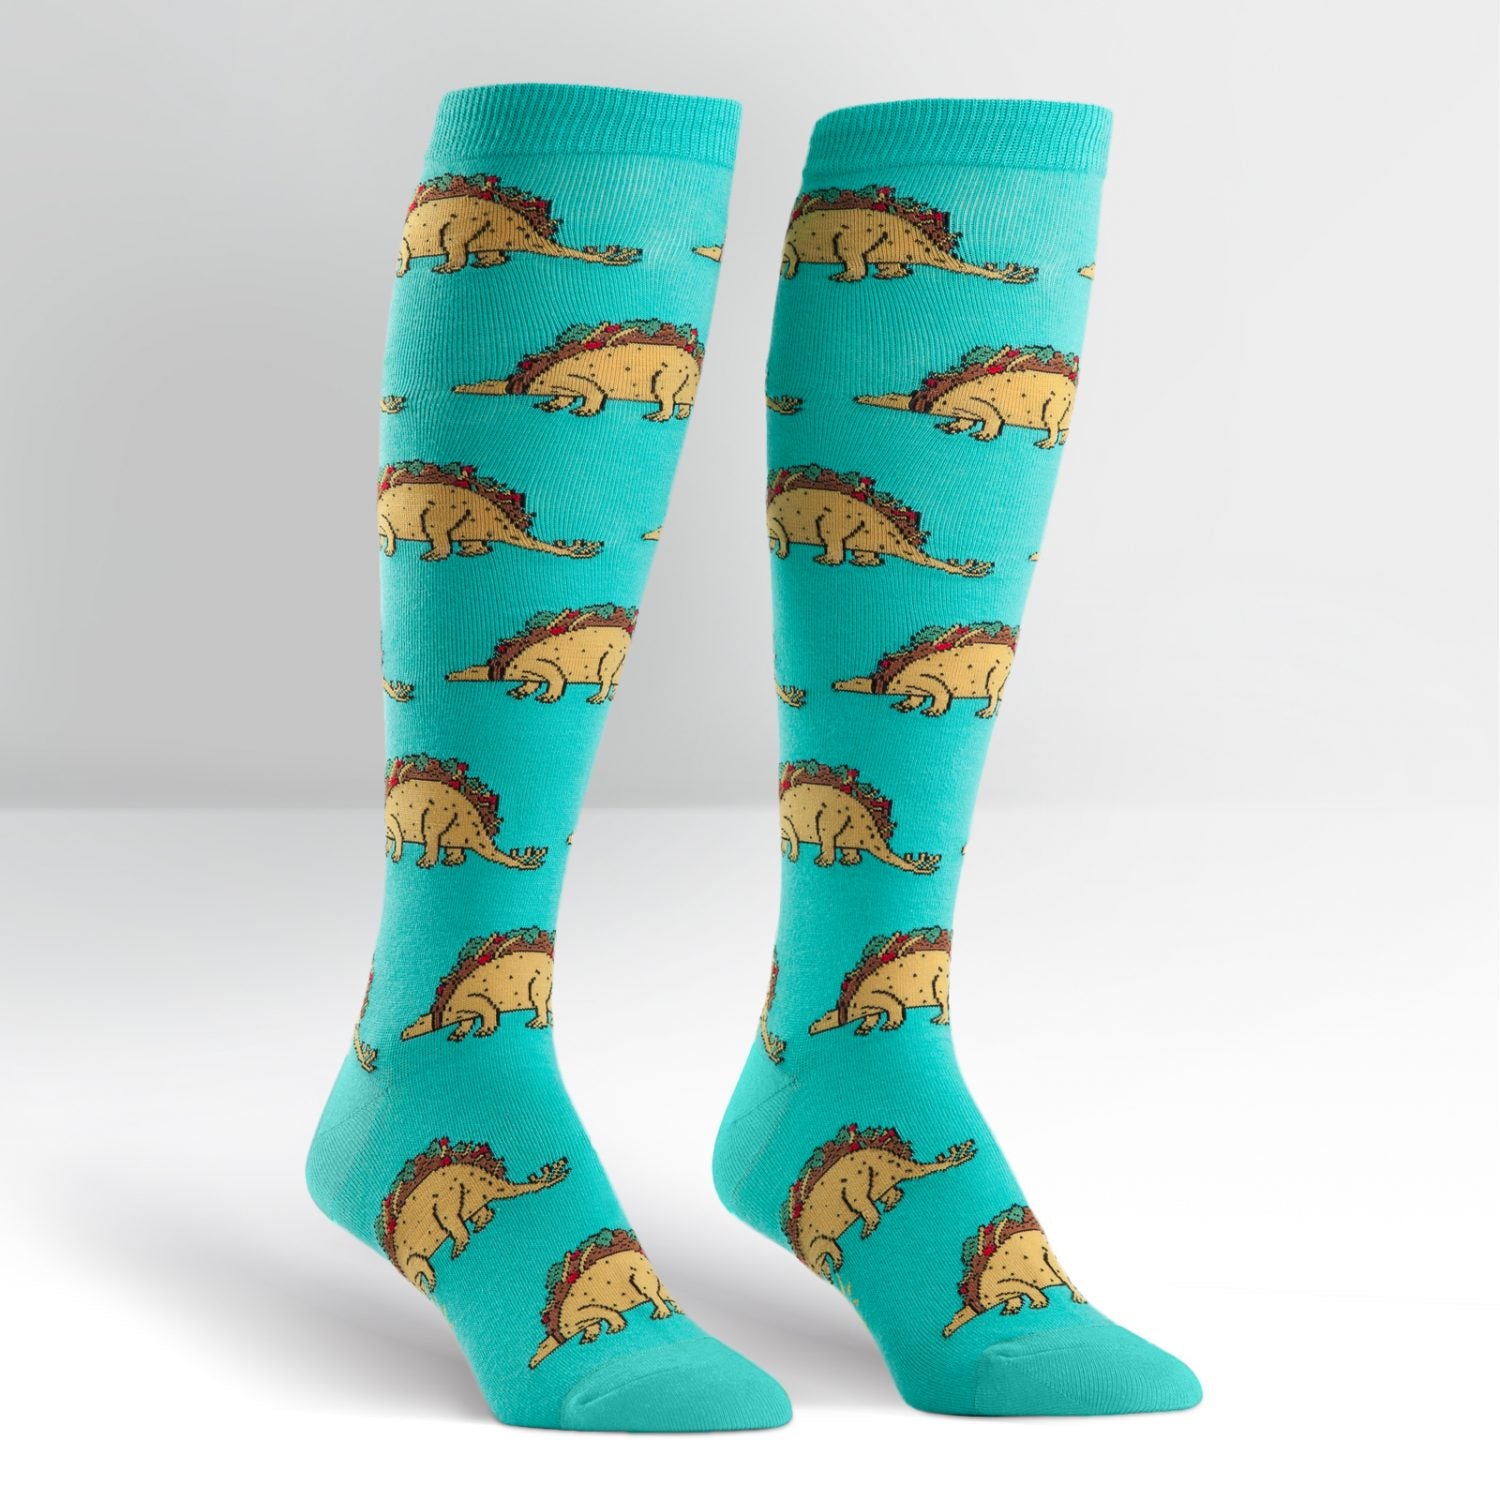 Green knee high socks with taco shells turned into dinosaurs all over- The Sockery